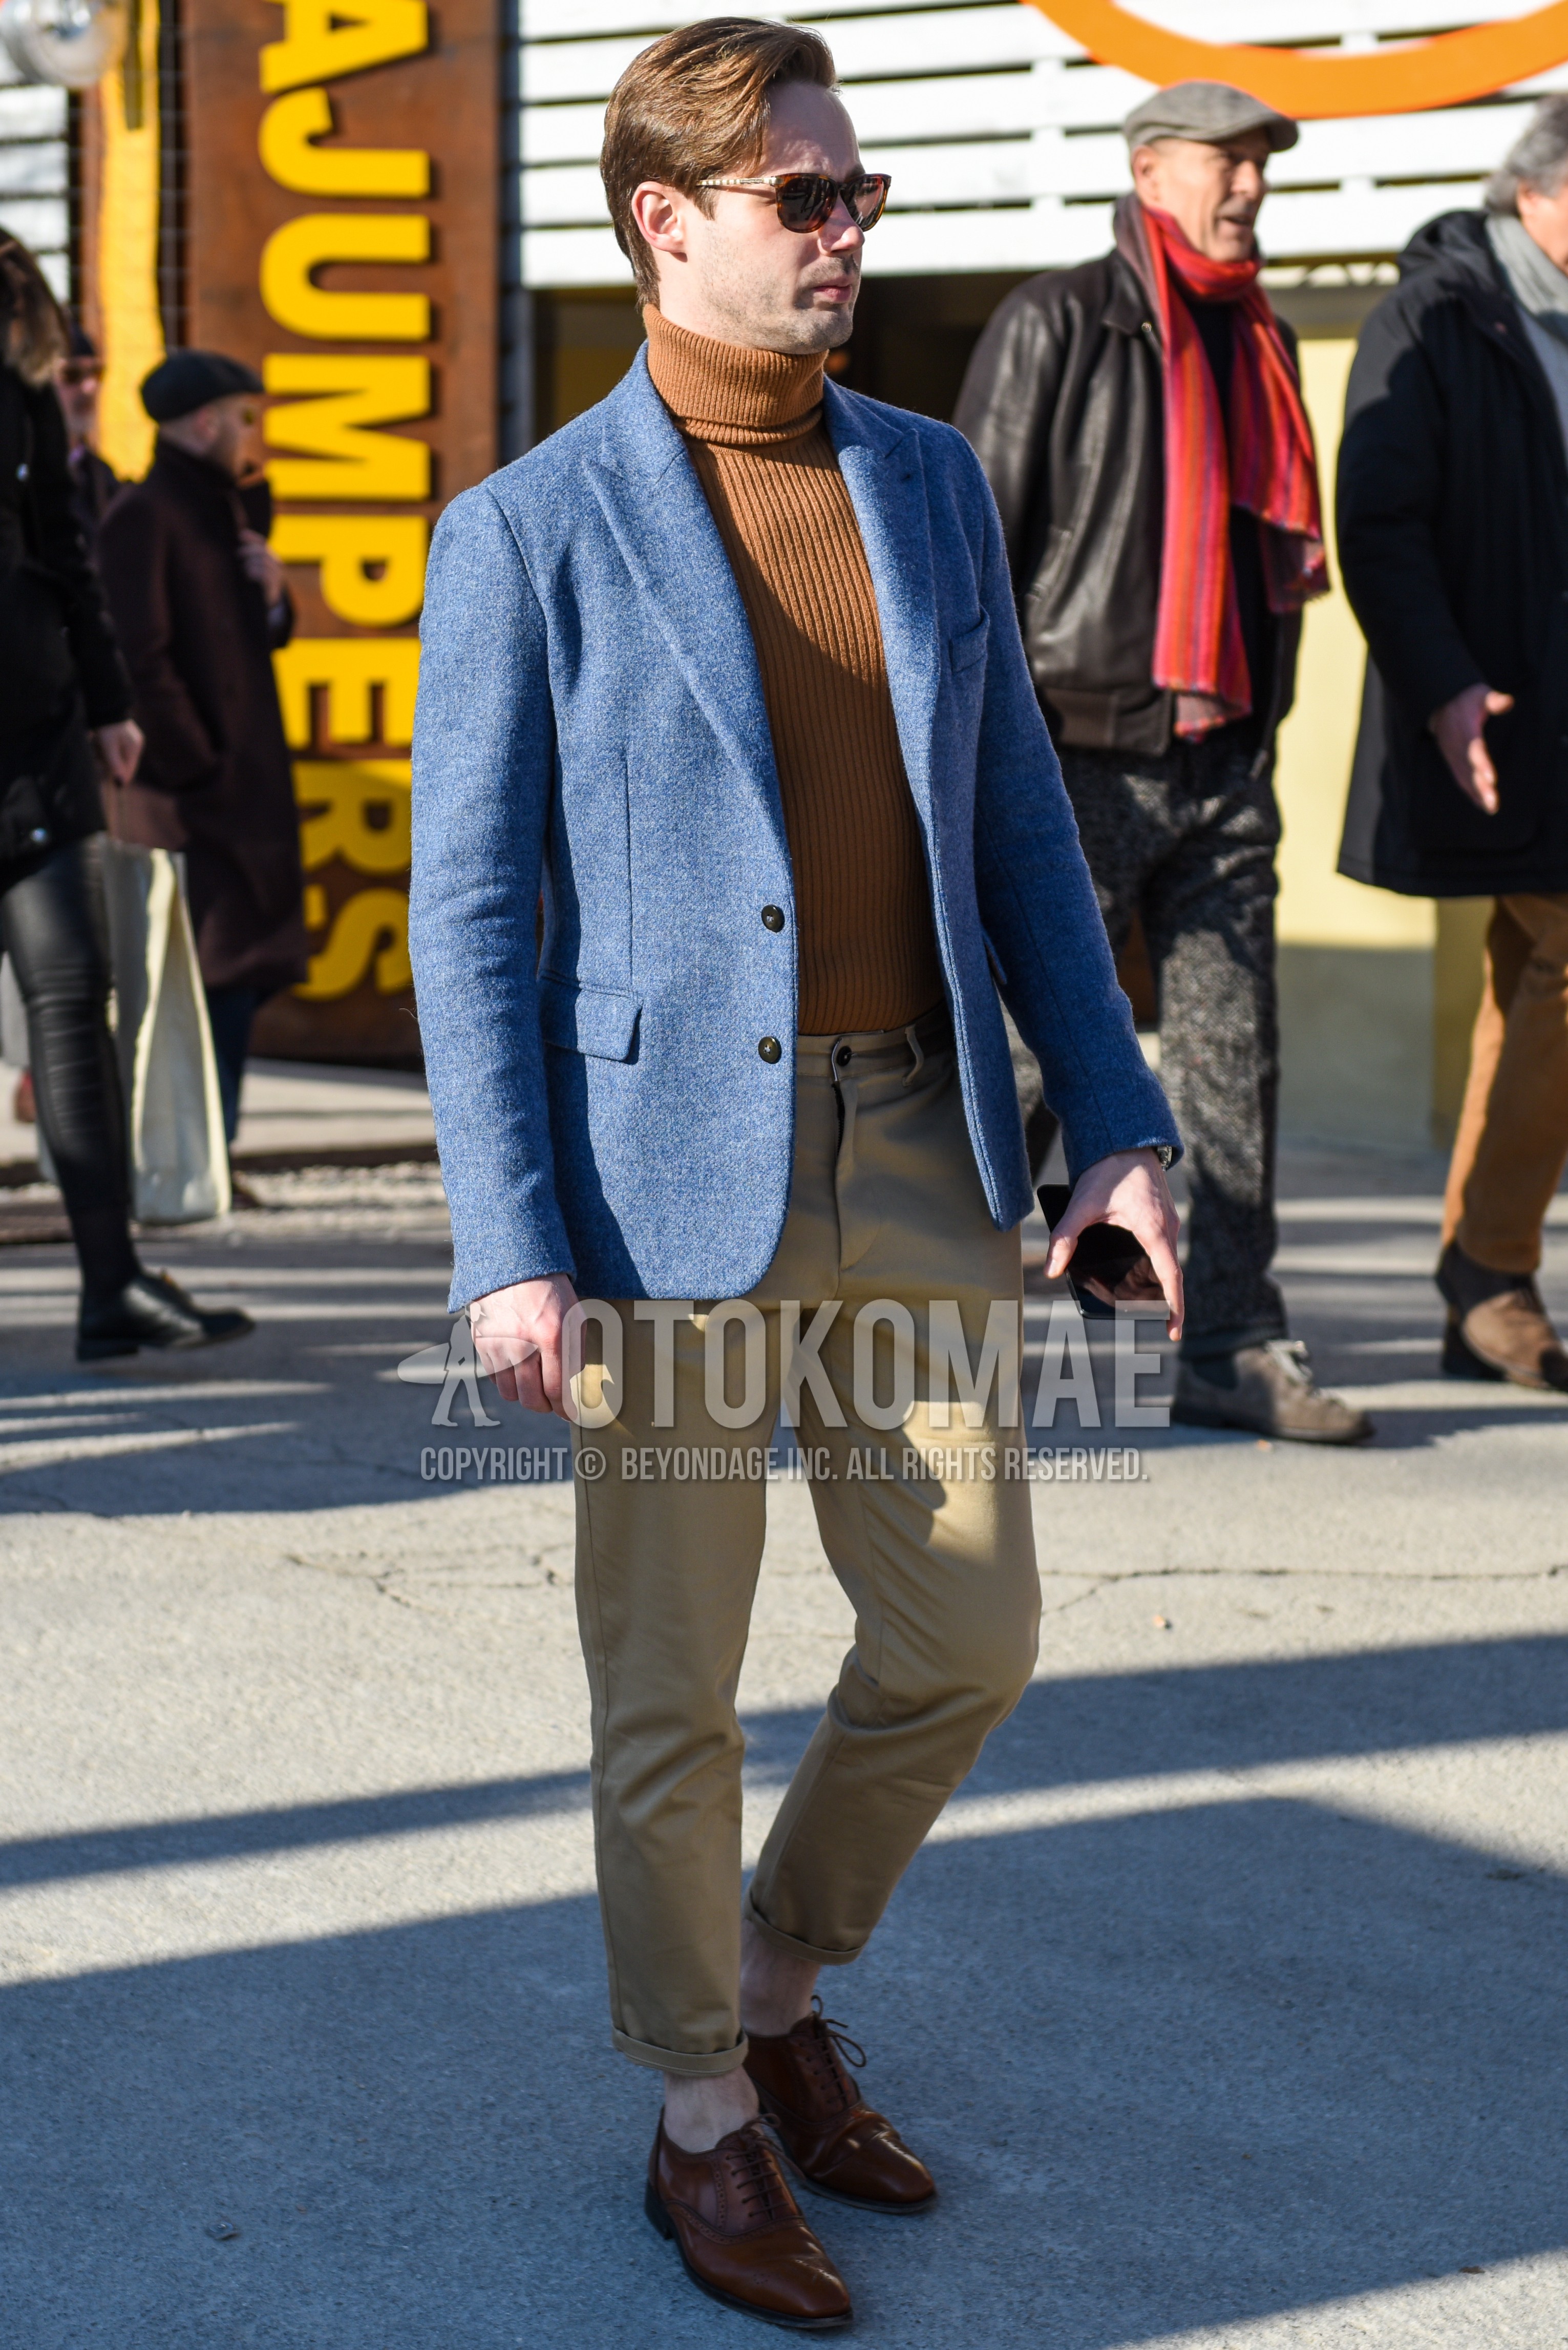 Men's spring autumn outfit with brown tortoiseshell sunglasses, gray plain tailored jacket, beige plain turtleneck knit, beige plain chinos, brown brogue shoes leather shoes.